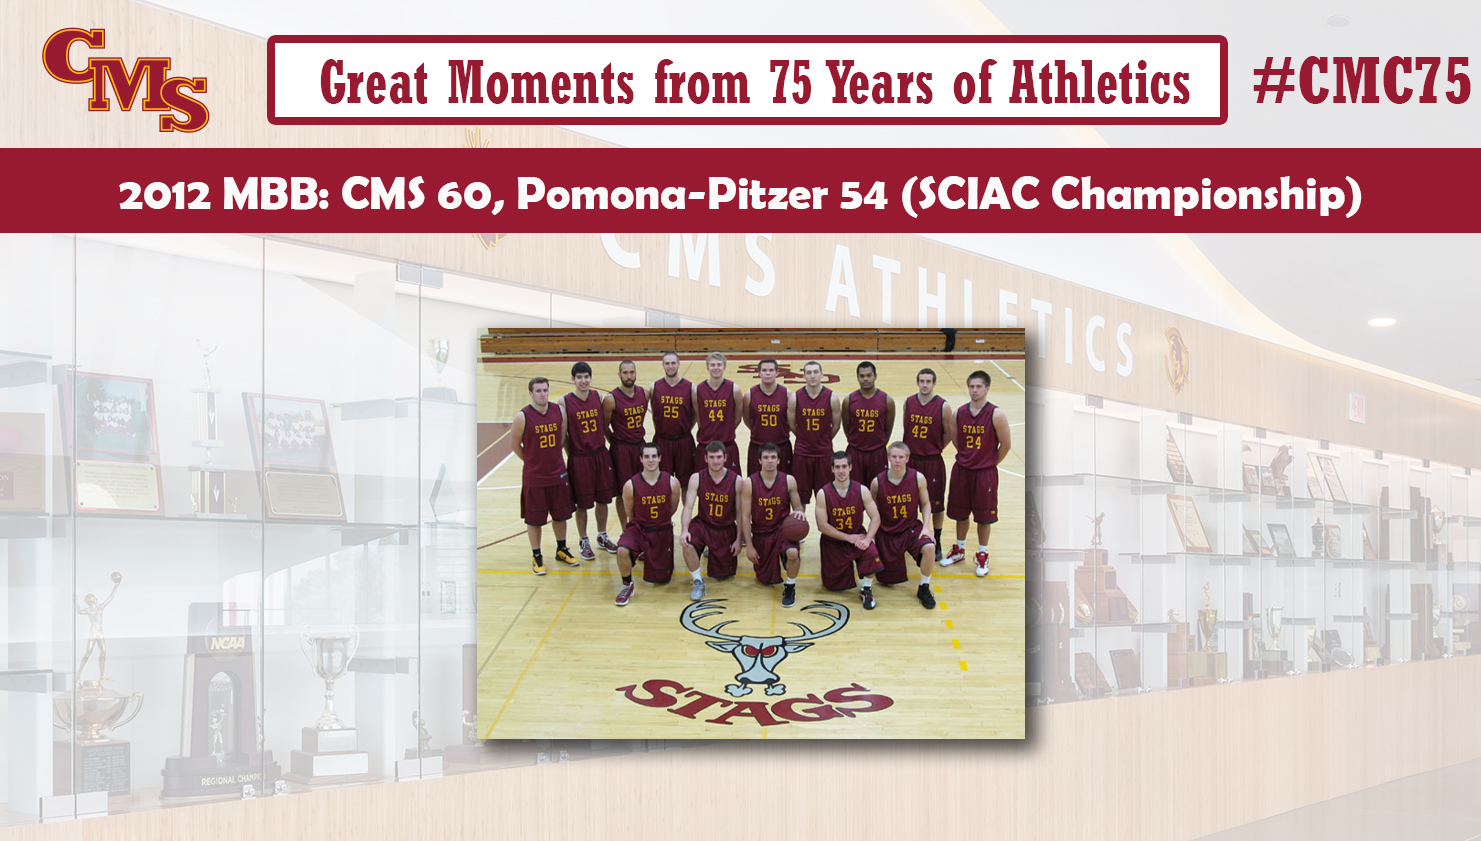 The 2012 Men's Basketball team photo. Words over the photo read: Great Moments from 75 Years of Athletics, 2012 MBB: CMS 60, Pomona-Pitzer 54 (SCIAC Championship)